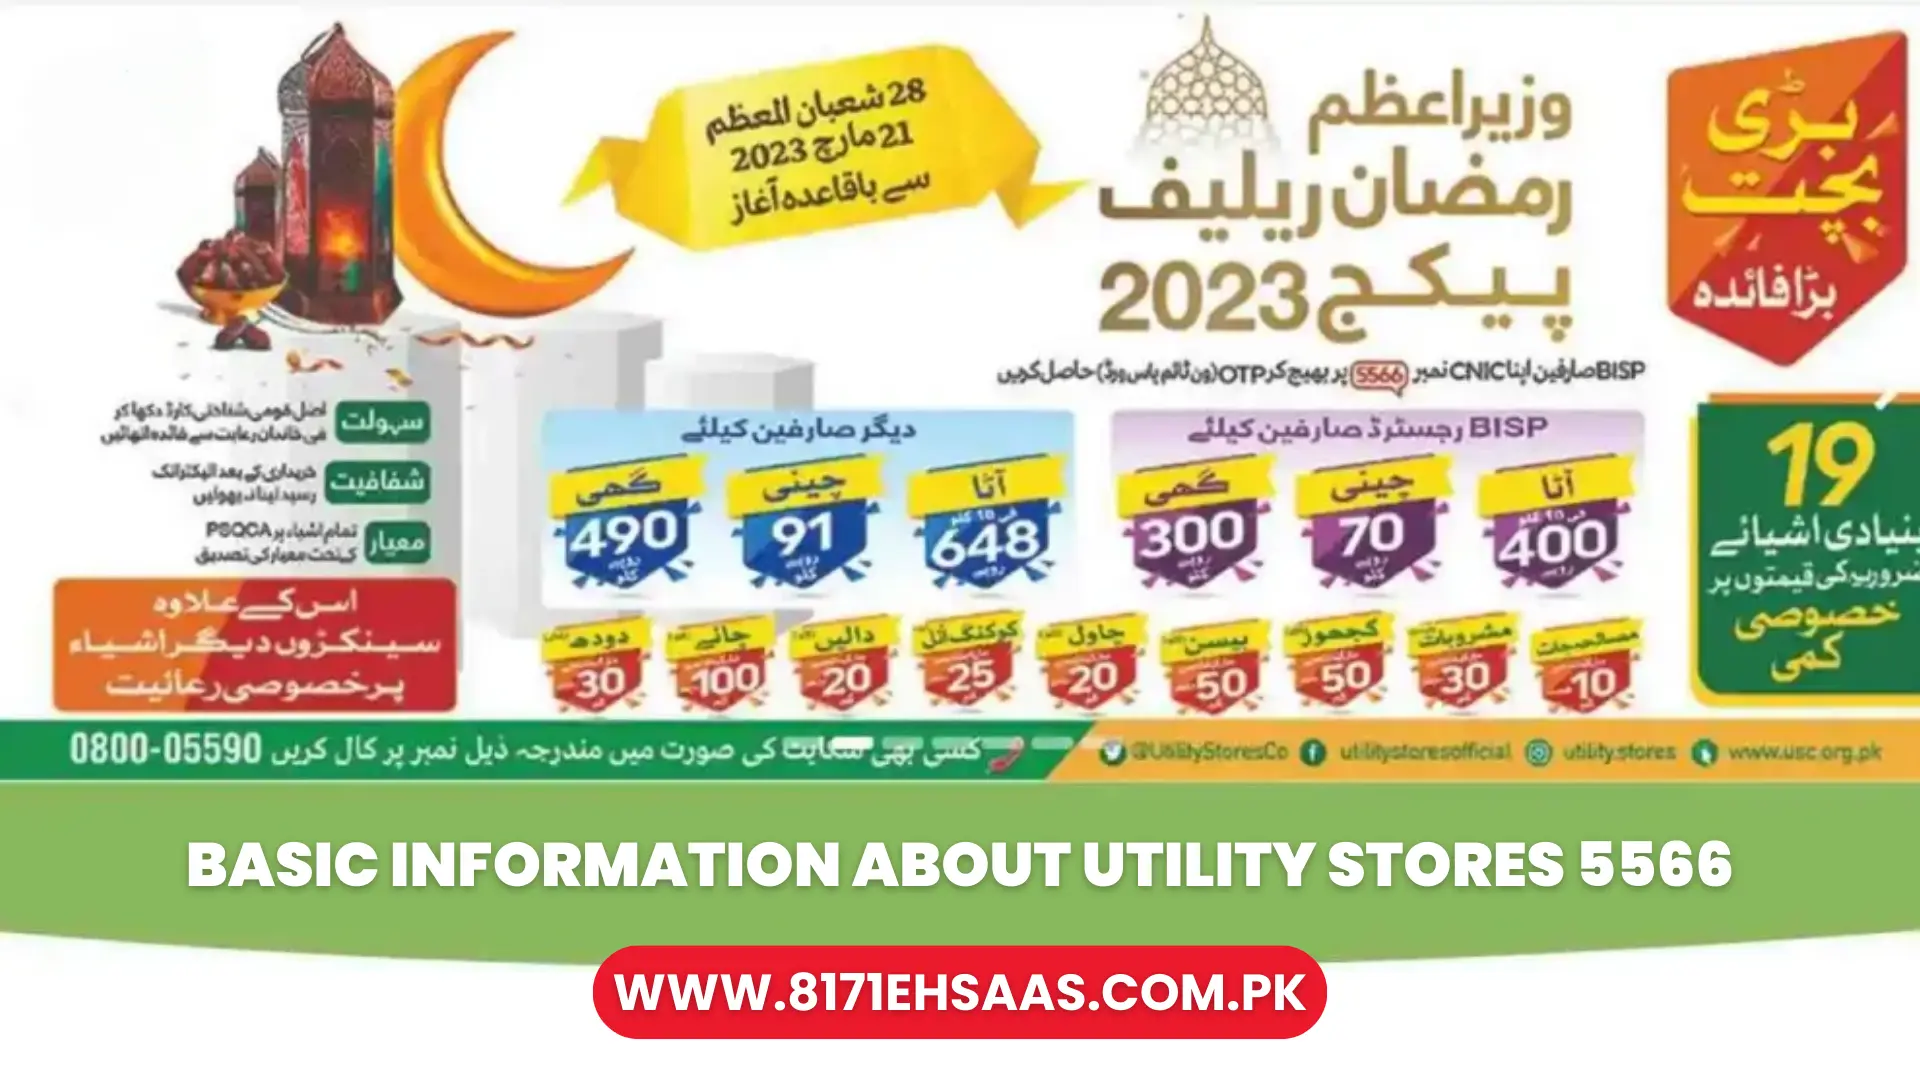 Basic Information about Utility Stores 5566